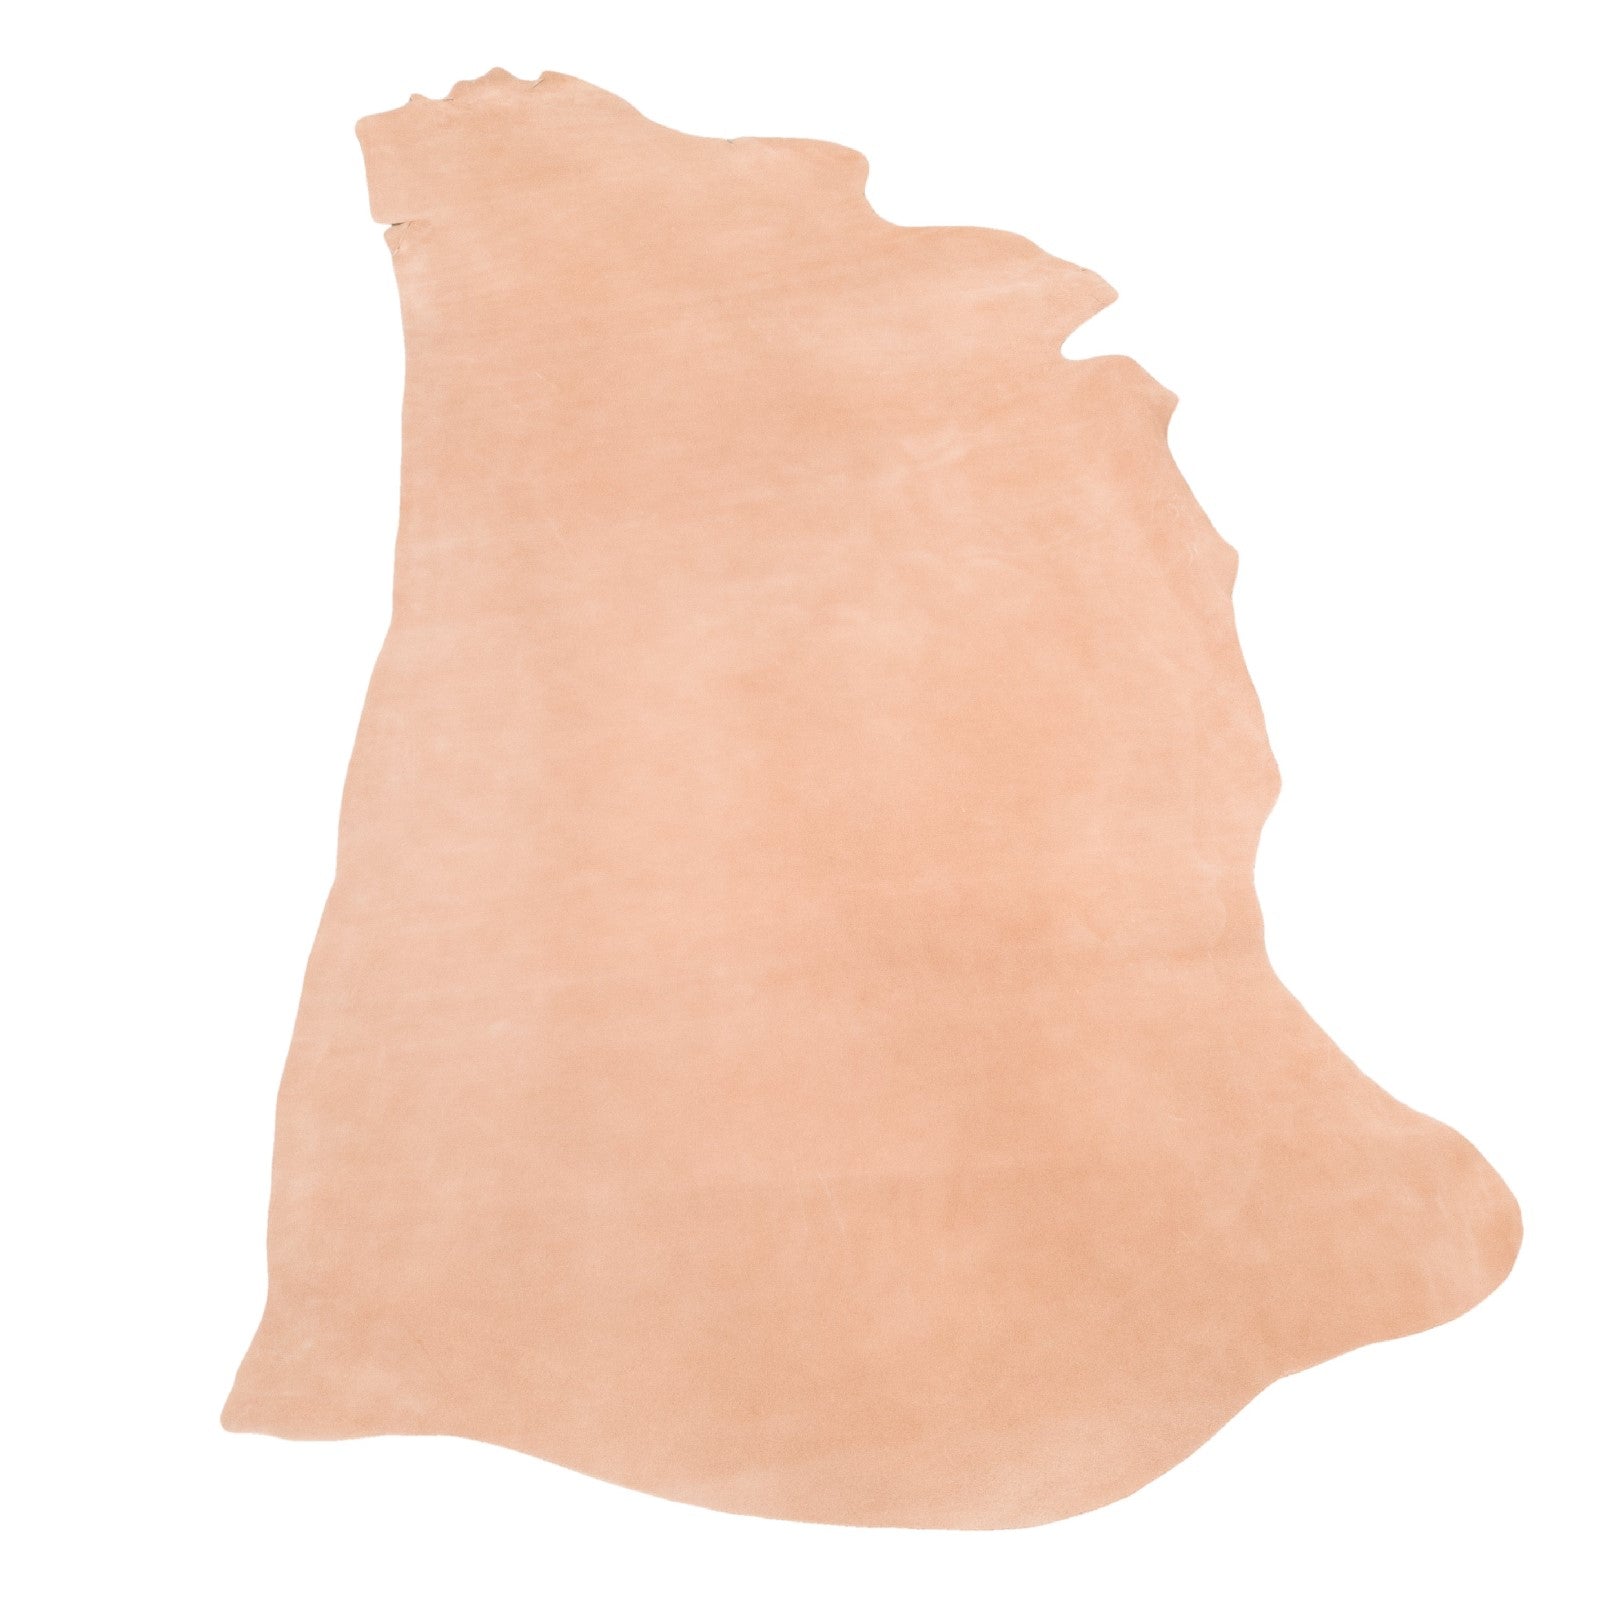 Austin (Dusty Rose), SB Foot, Non-stock, 5-6oz, Oil Tanned Hides, Side / 21 - 23 Sq Ft | The Leather Guy